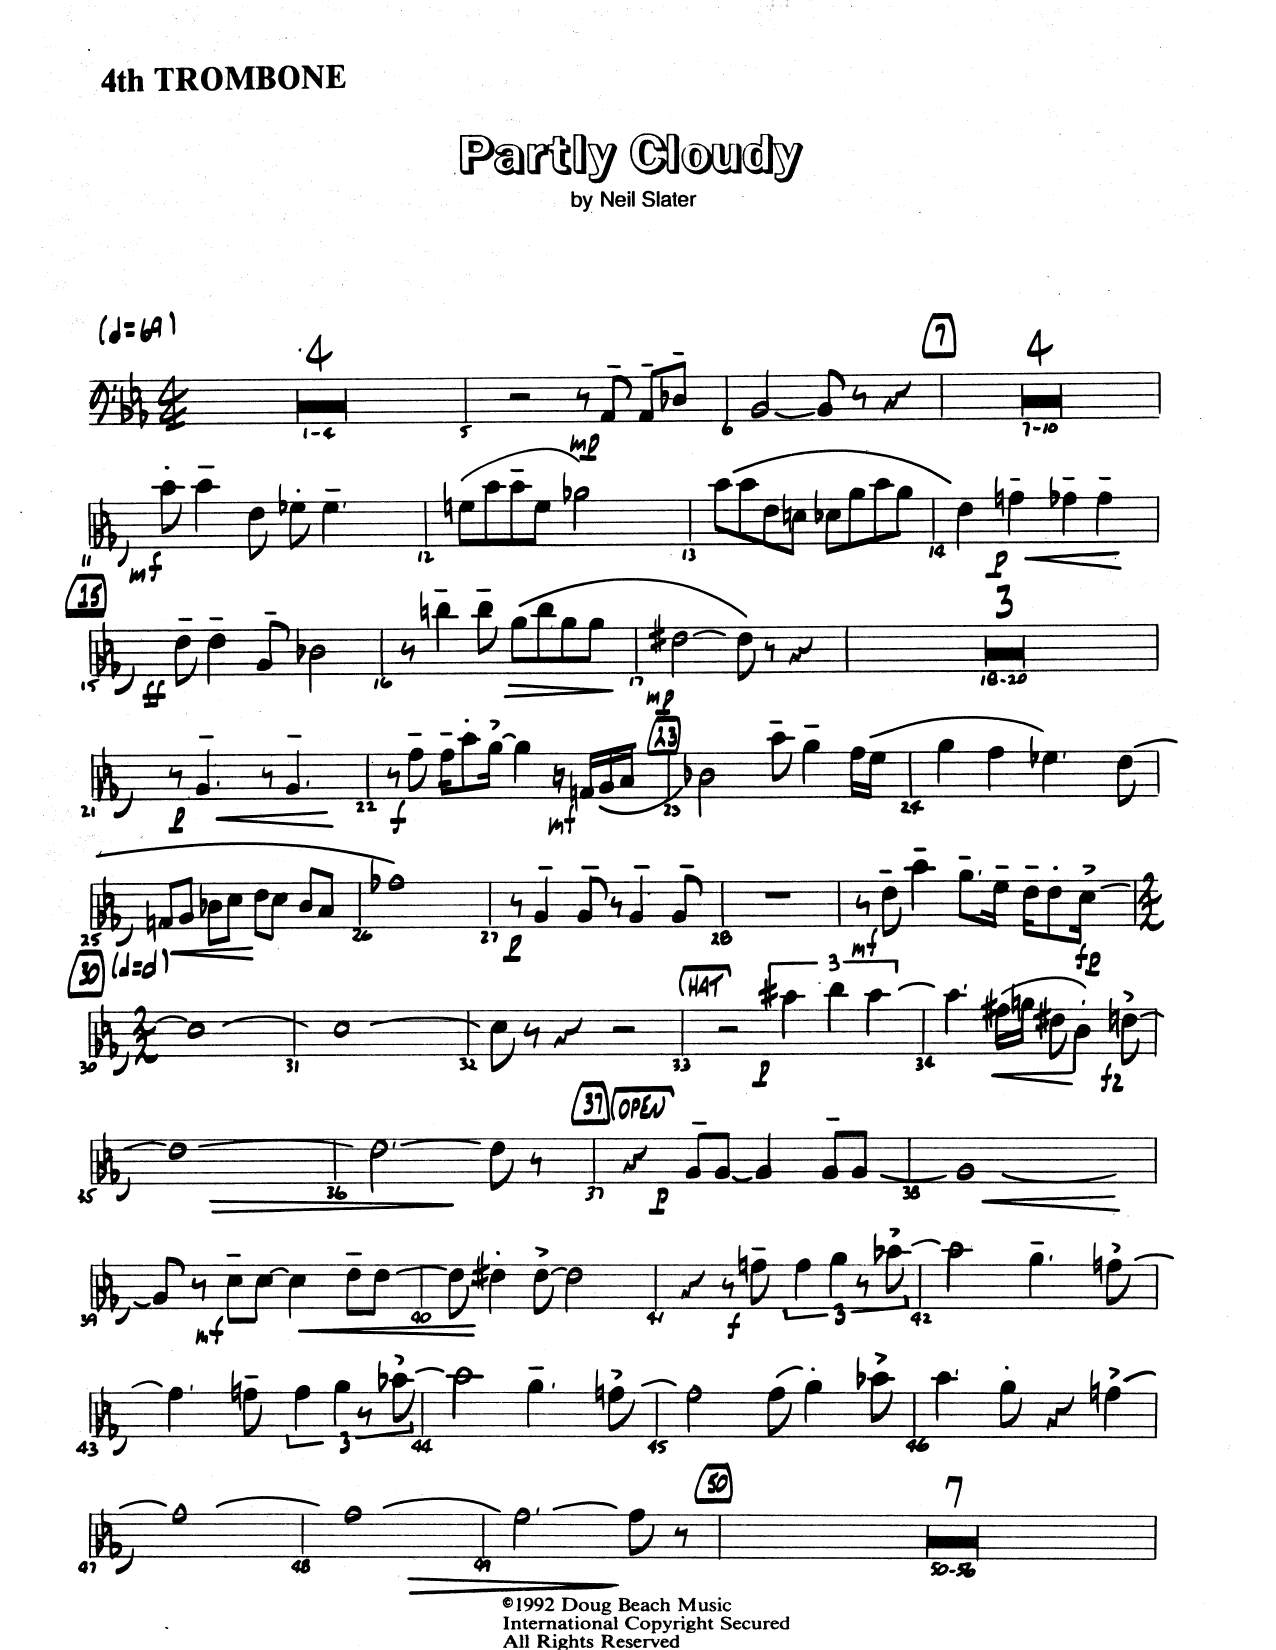 Download Neil Slater Partly Cloudy - 4th Trombone Sheet Music